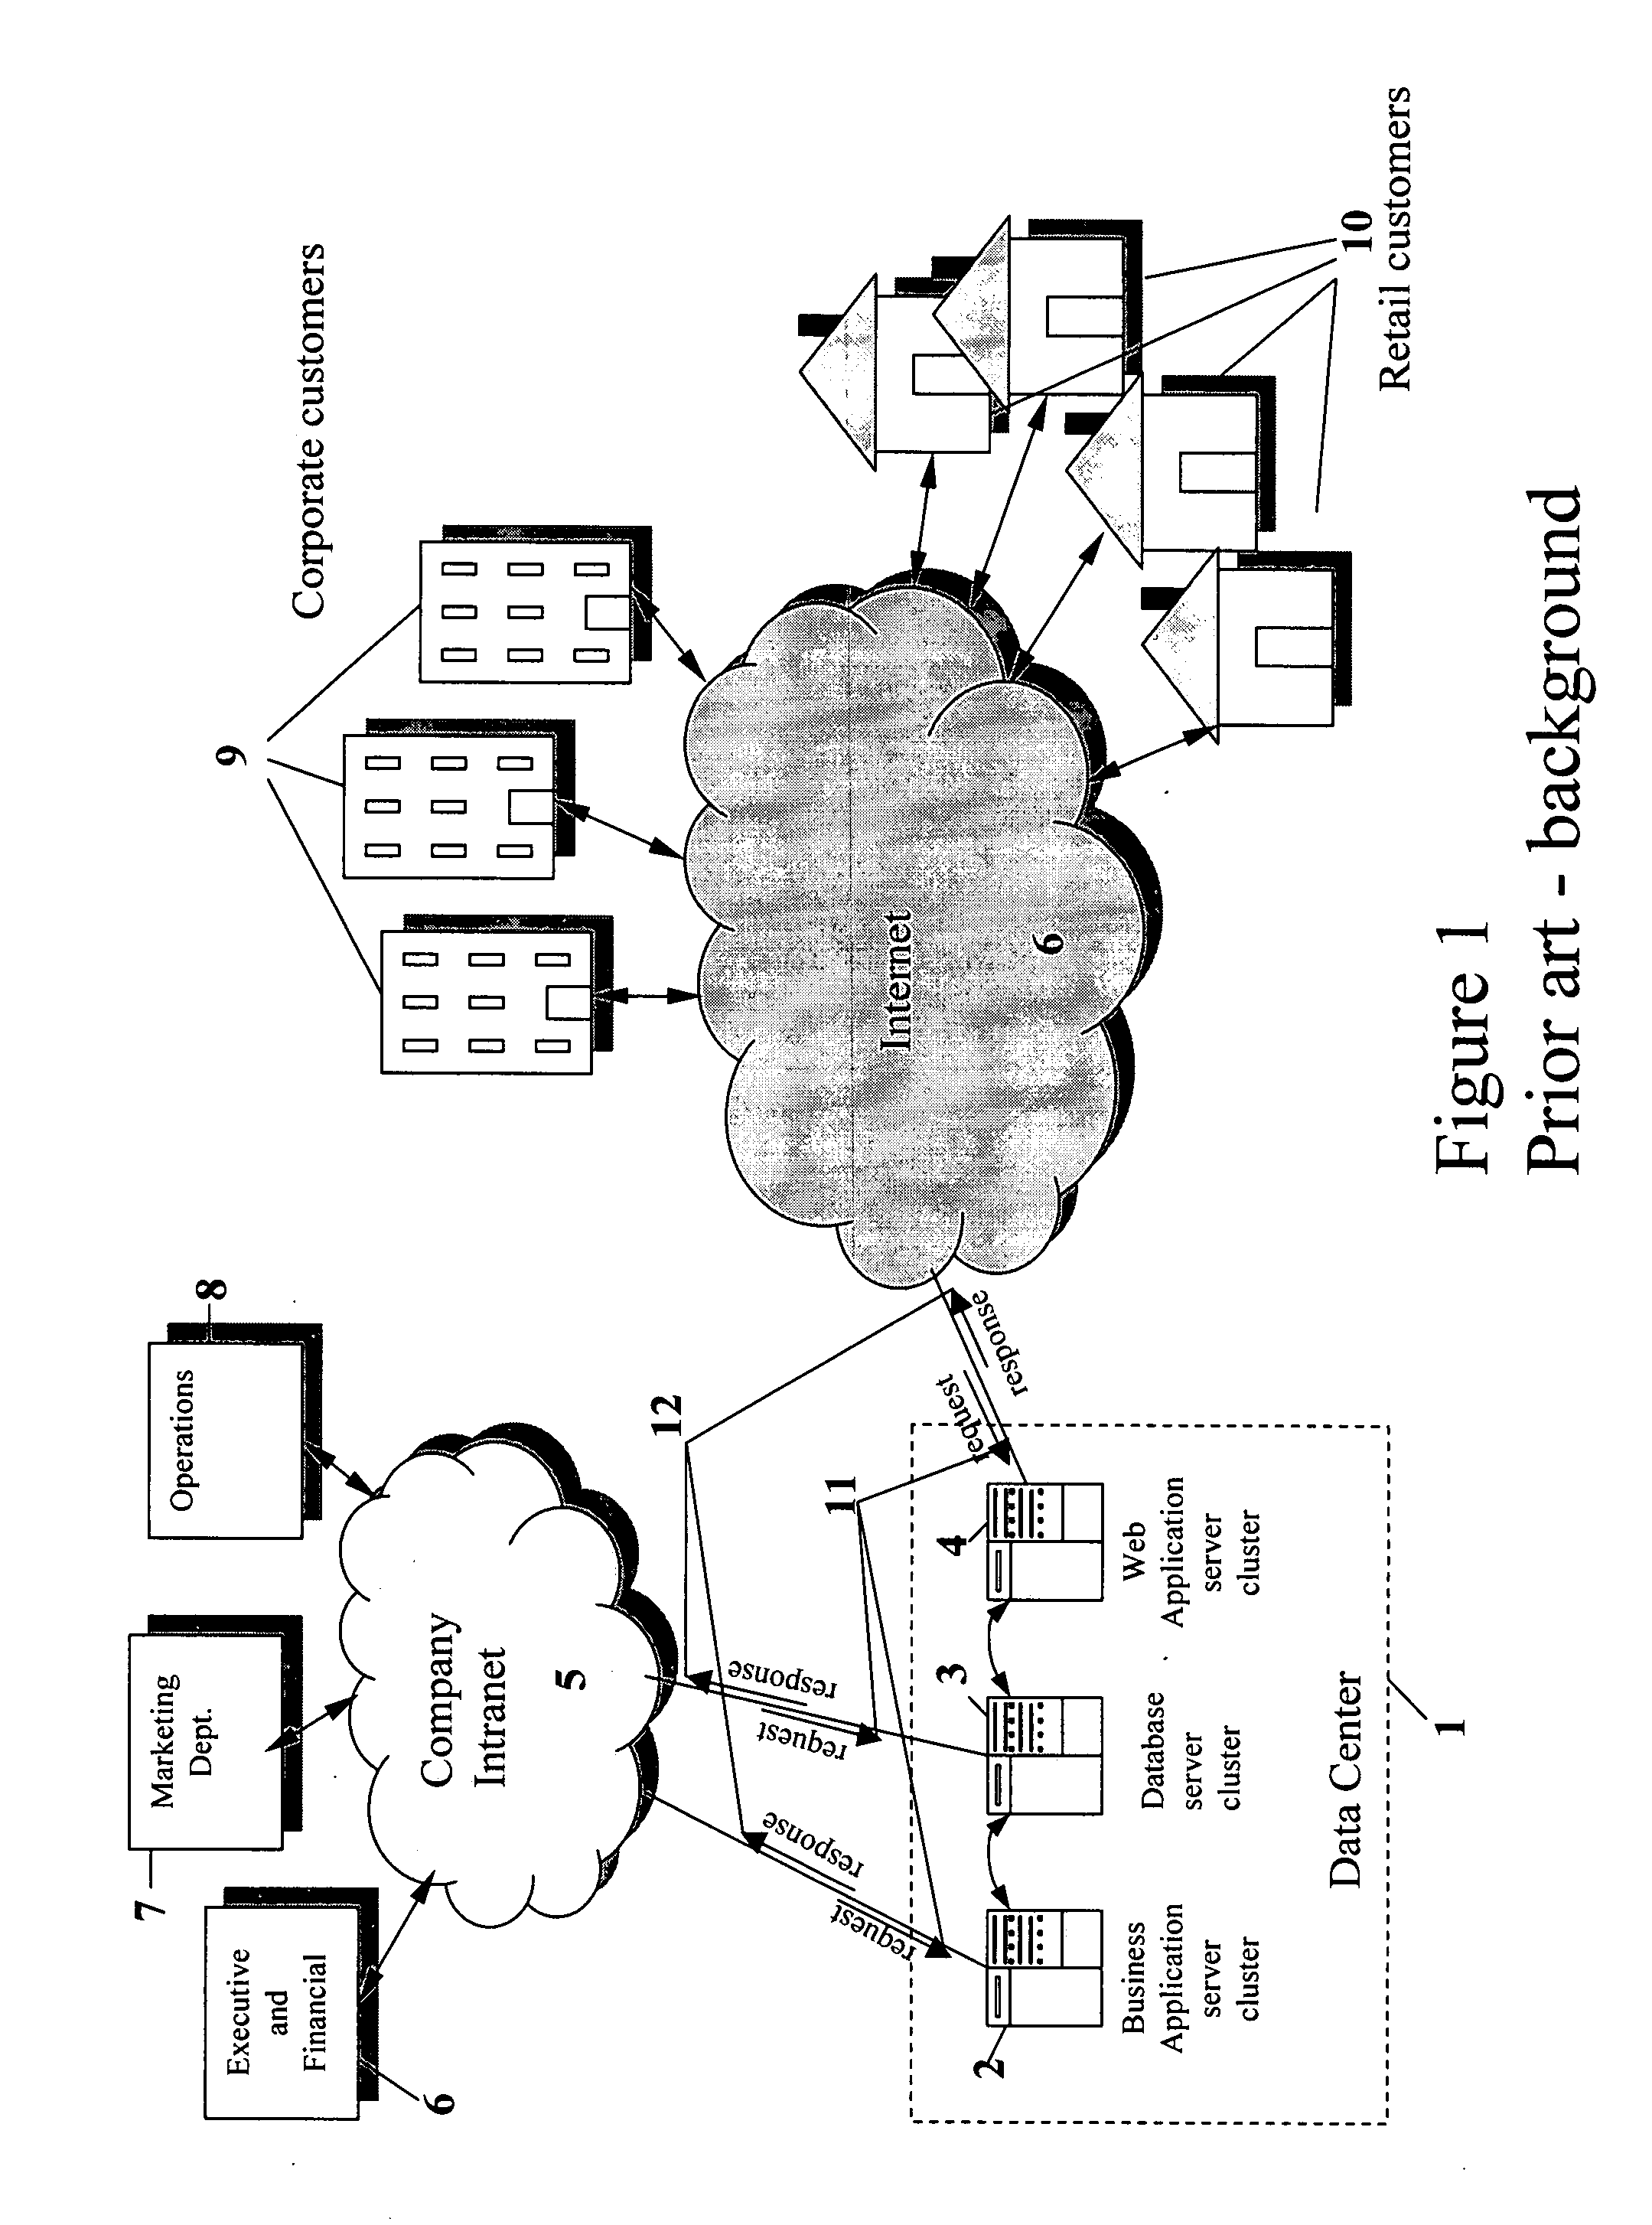 System and method for capacity planning for systems with multithreaded multicore multiprocessor resources